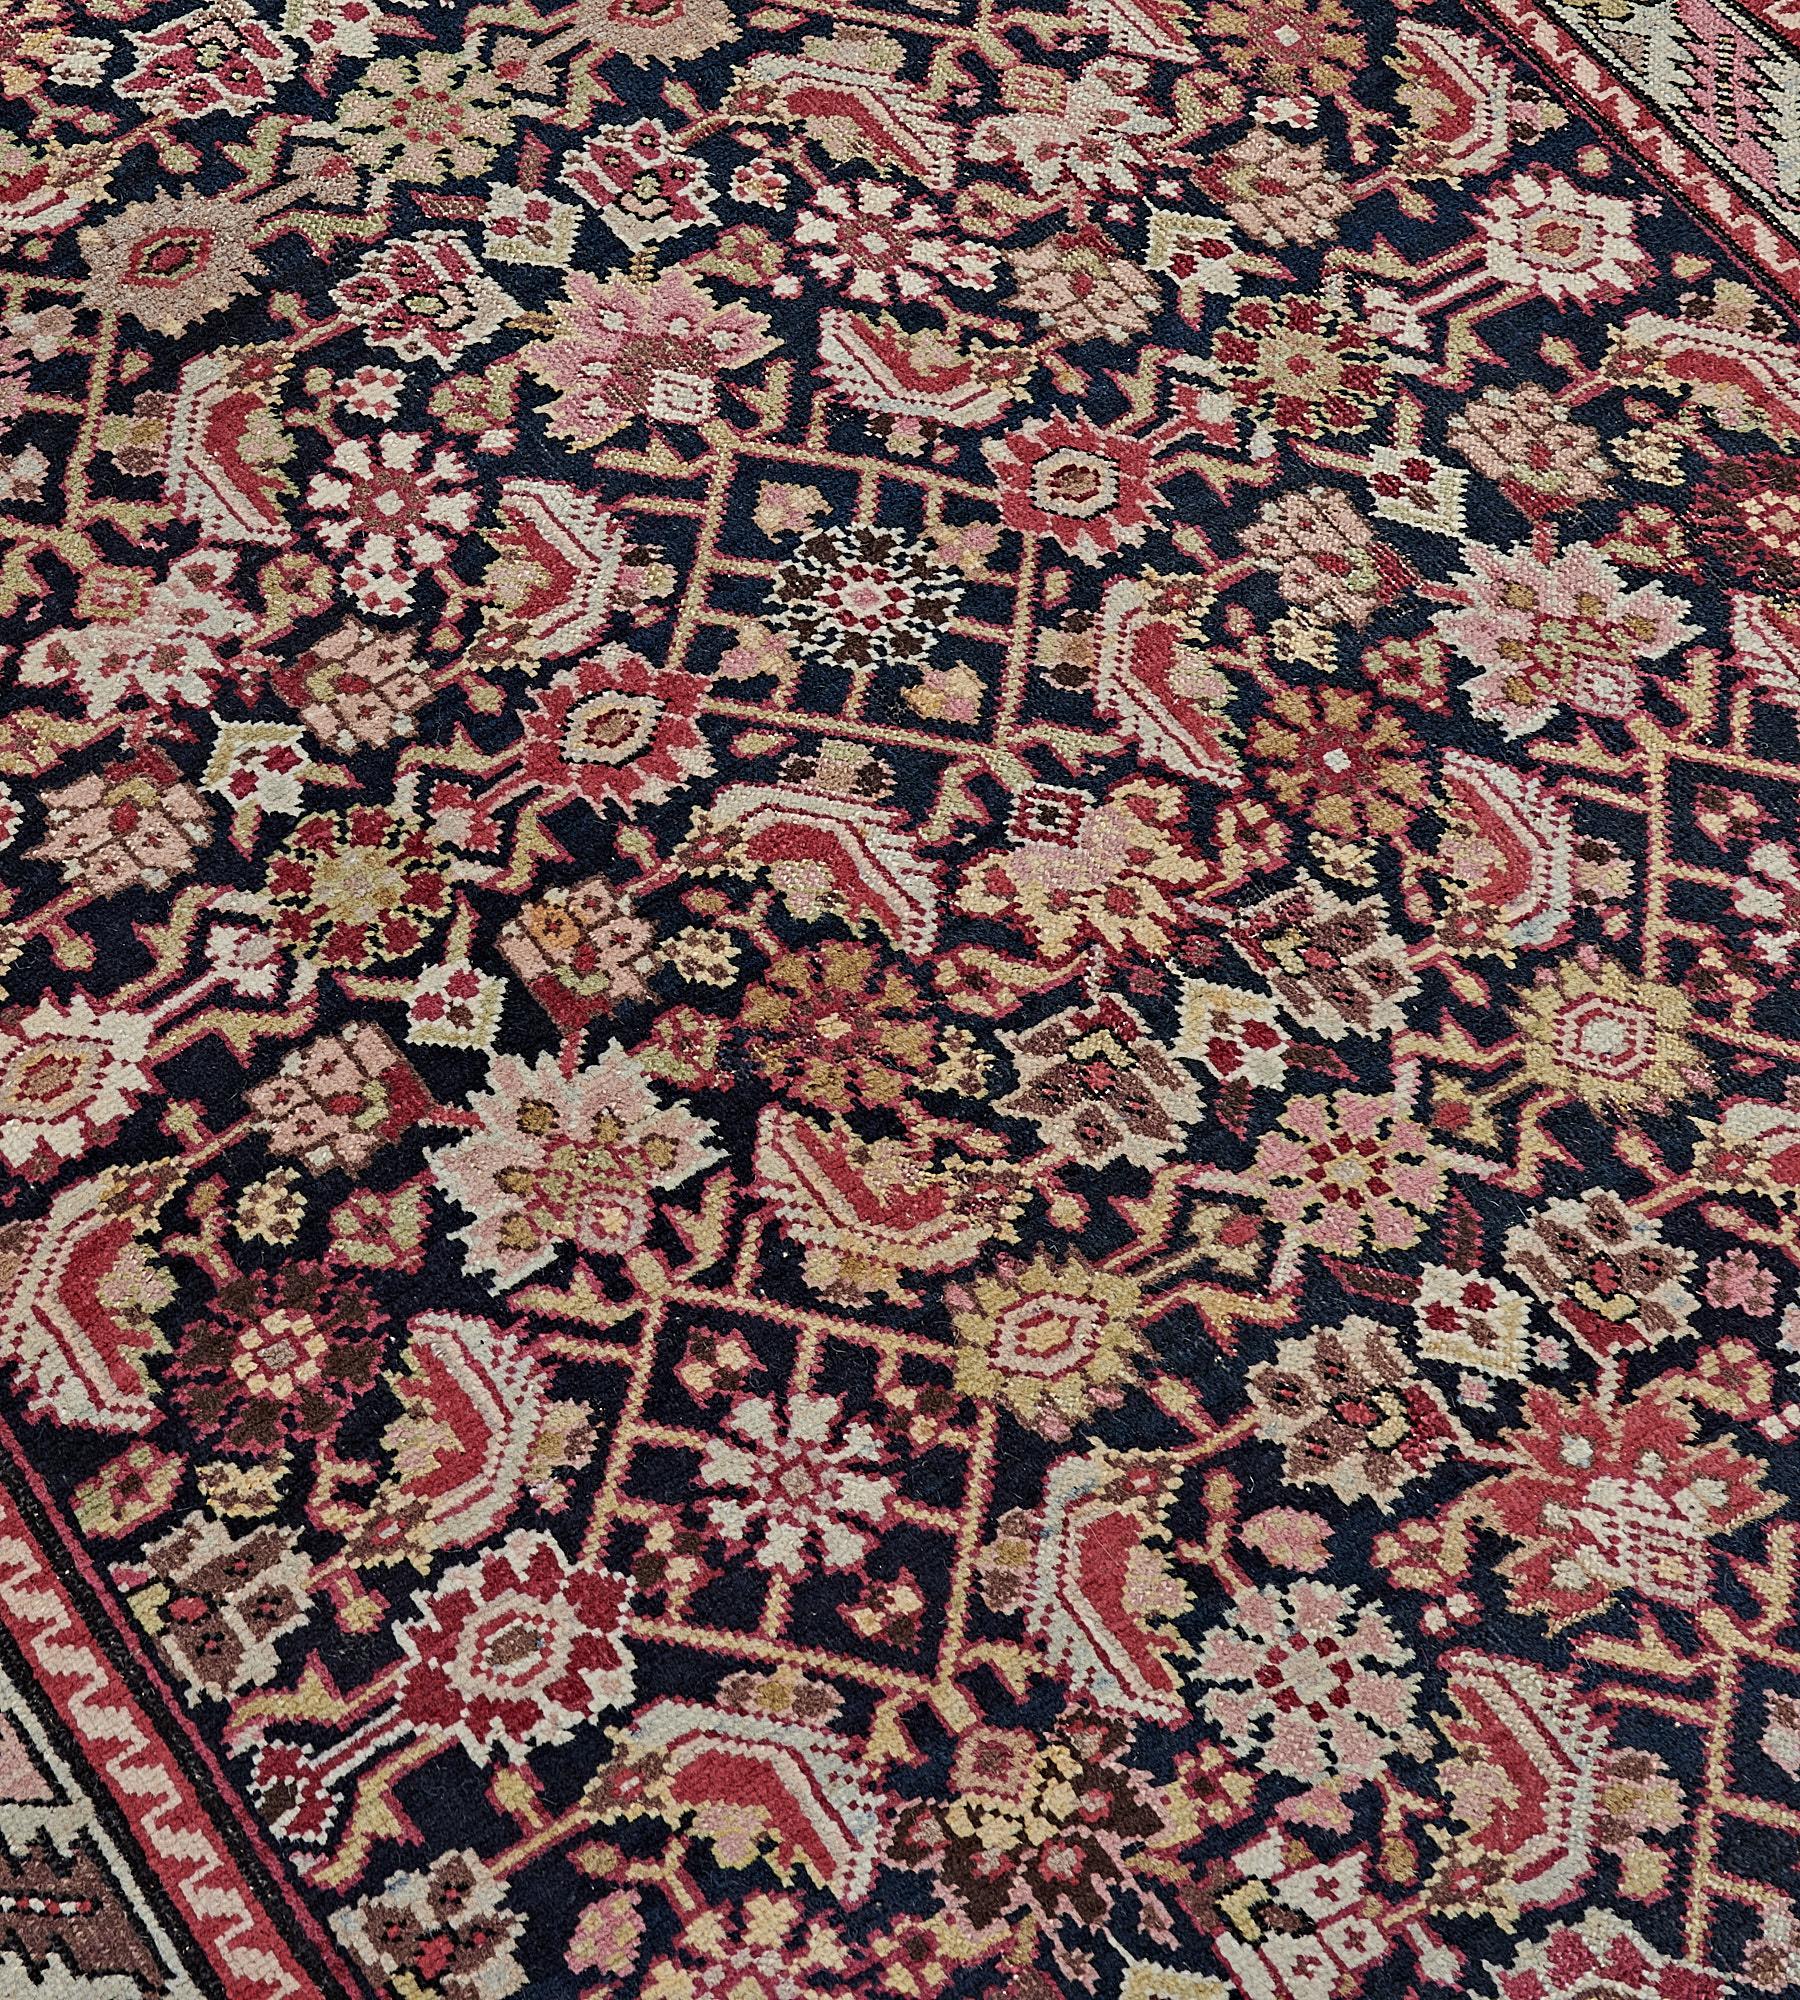 This antique, circa 1890, Karabagh runner has a charcoal-blue field with an overall herati-pattern design of dusty-pink, rust-red and golden-yellow flowerheads and serrated leaves, in an ivory narrow border of serrated leaves linking flowerheads